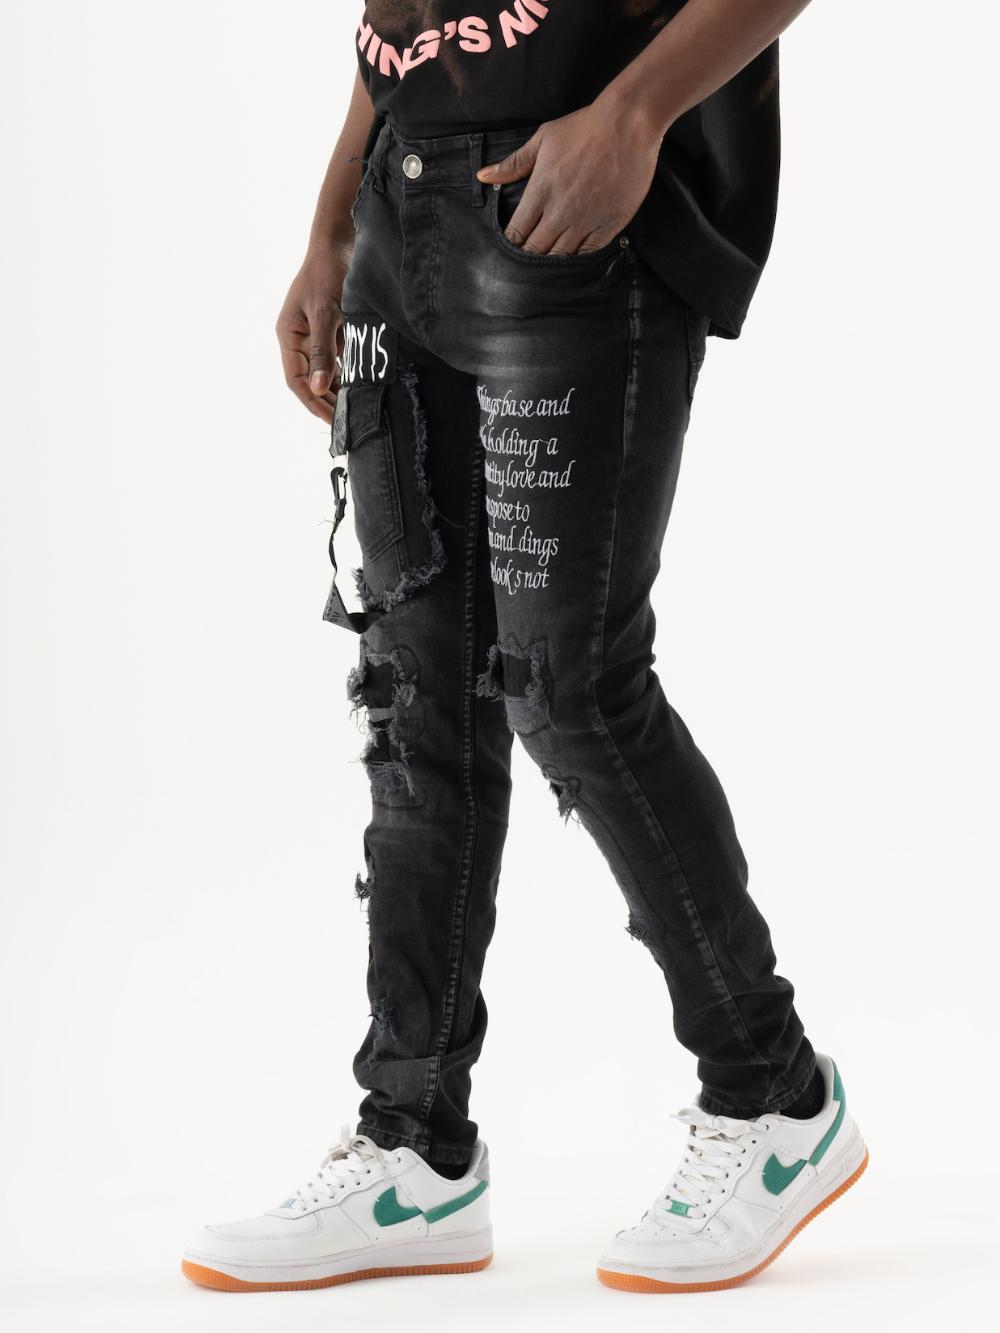 A man wearing black ripped jeans and a black ONE SOUL t - shirt.